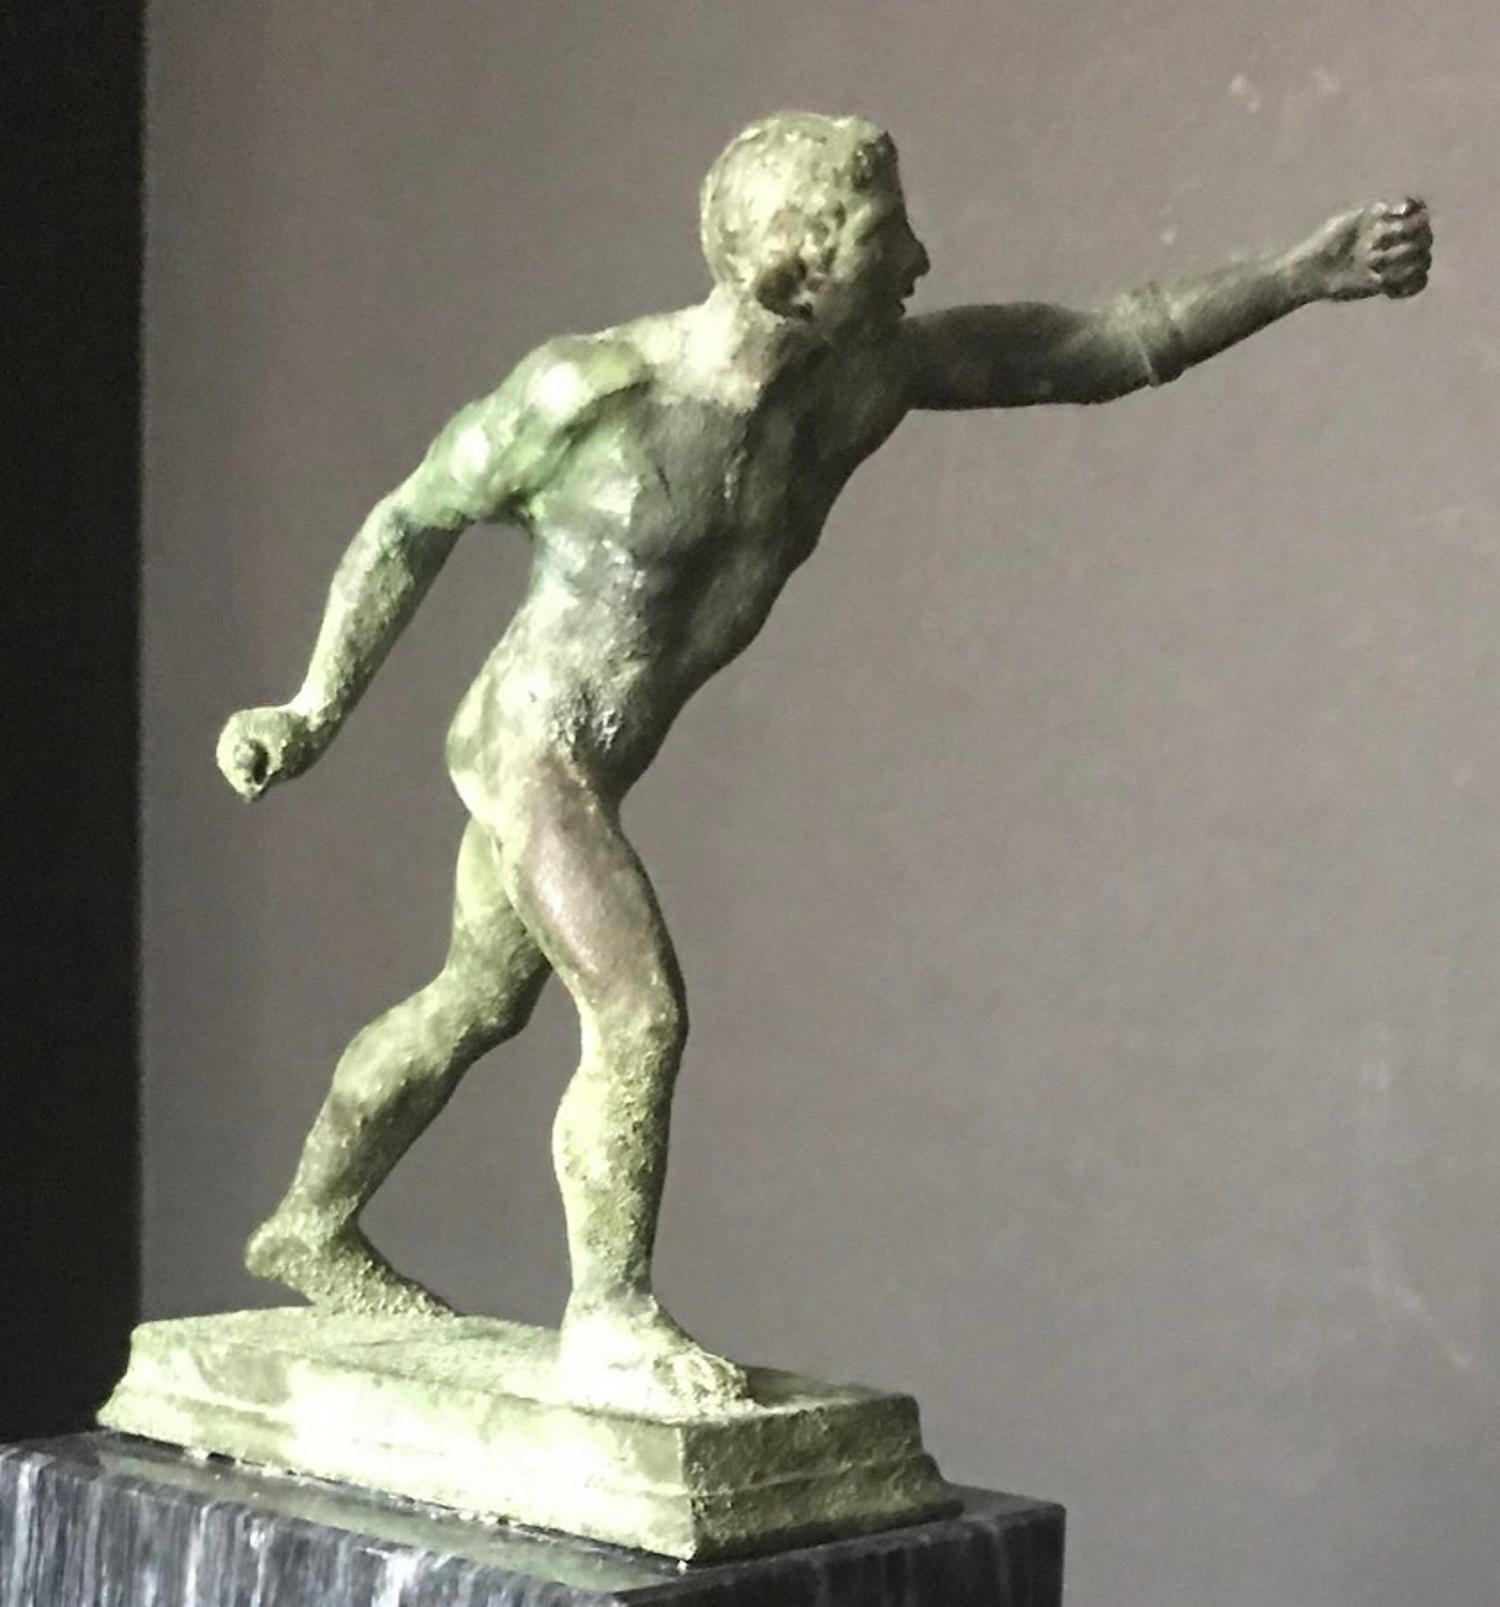 A neoclassical Italian bronze nude figure, with verdigris patina, of the Borghese Gladiator on a raised marble base.

